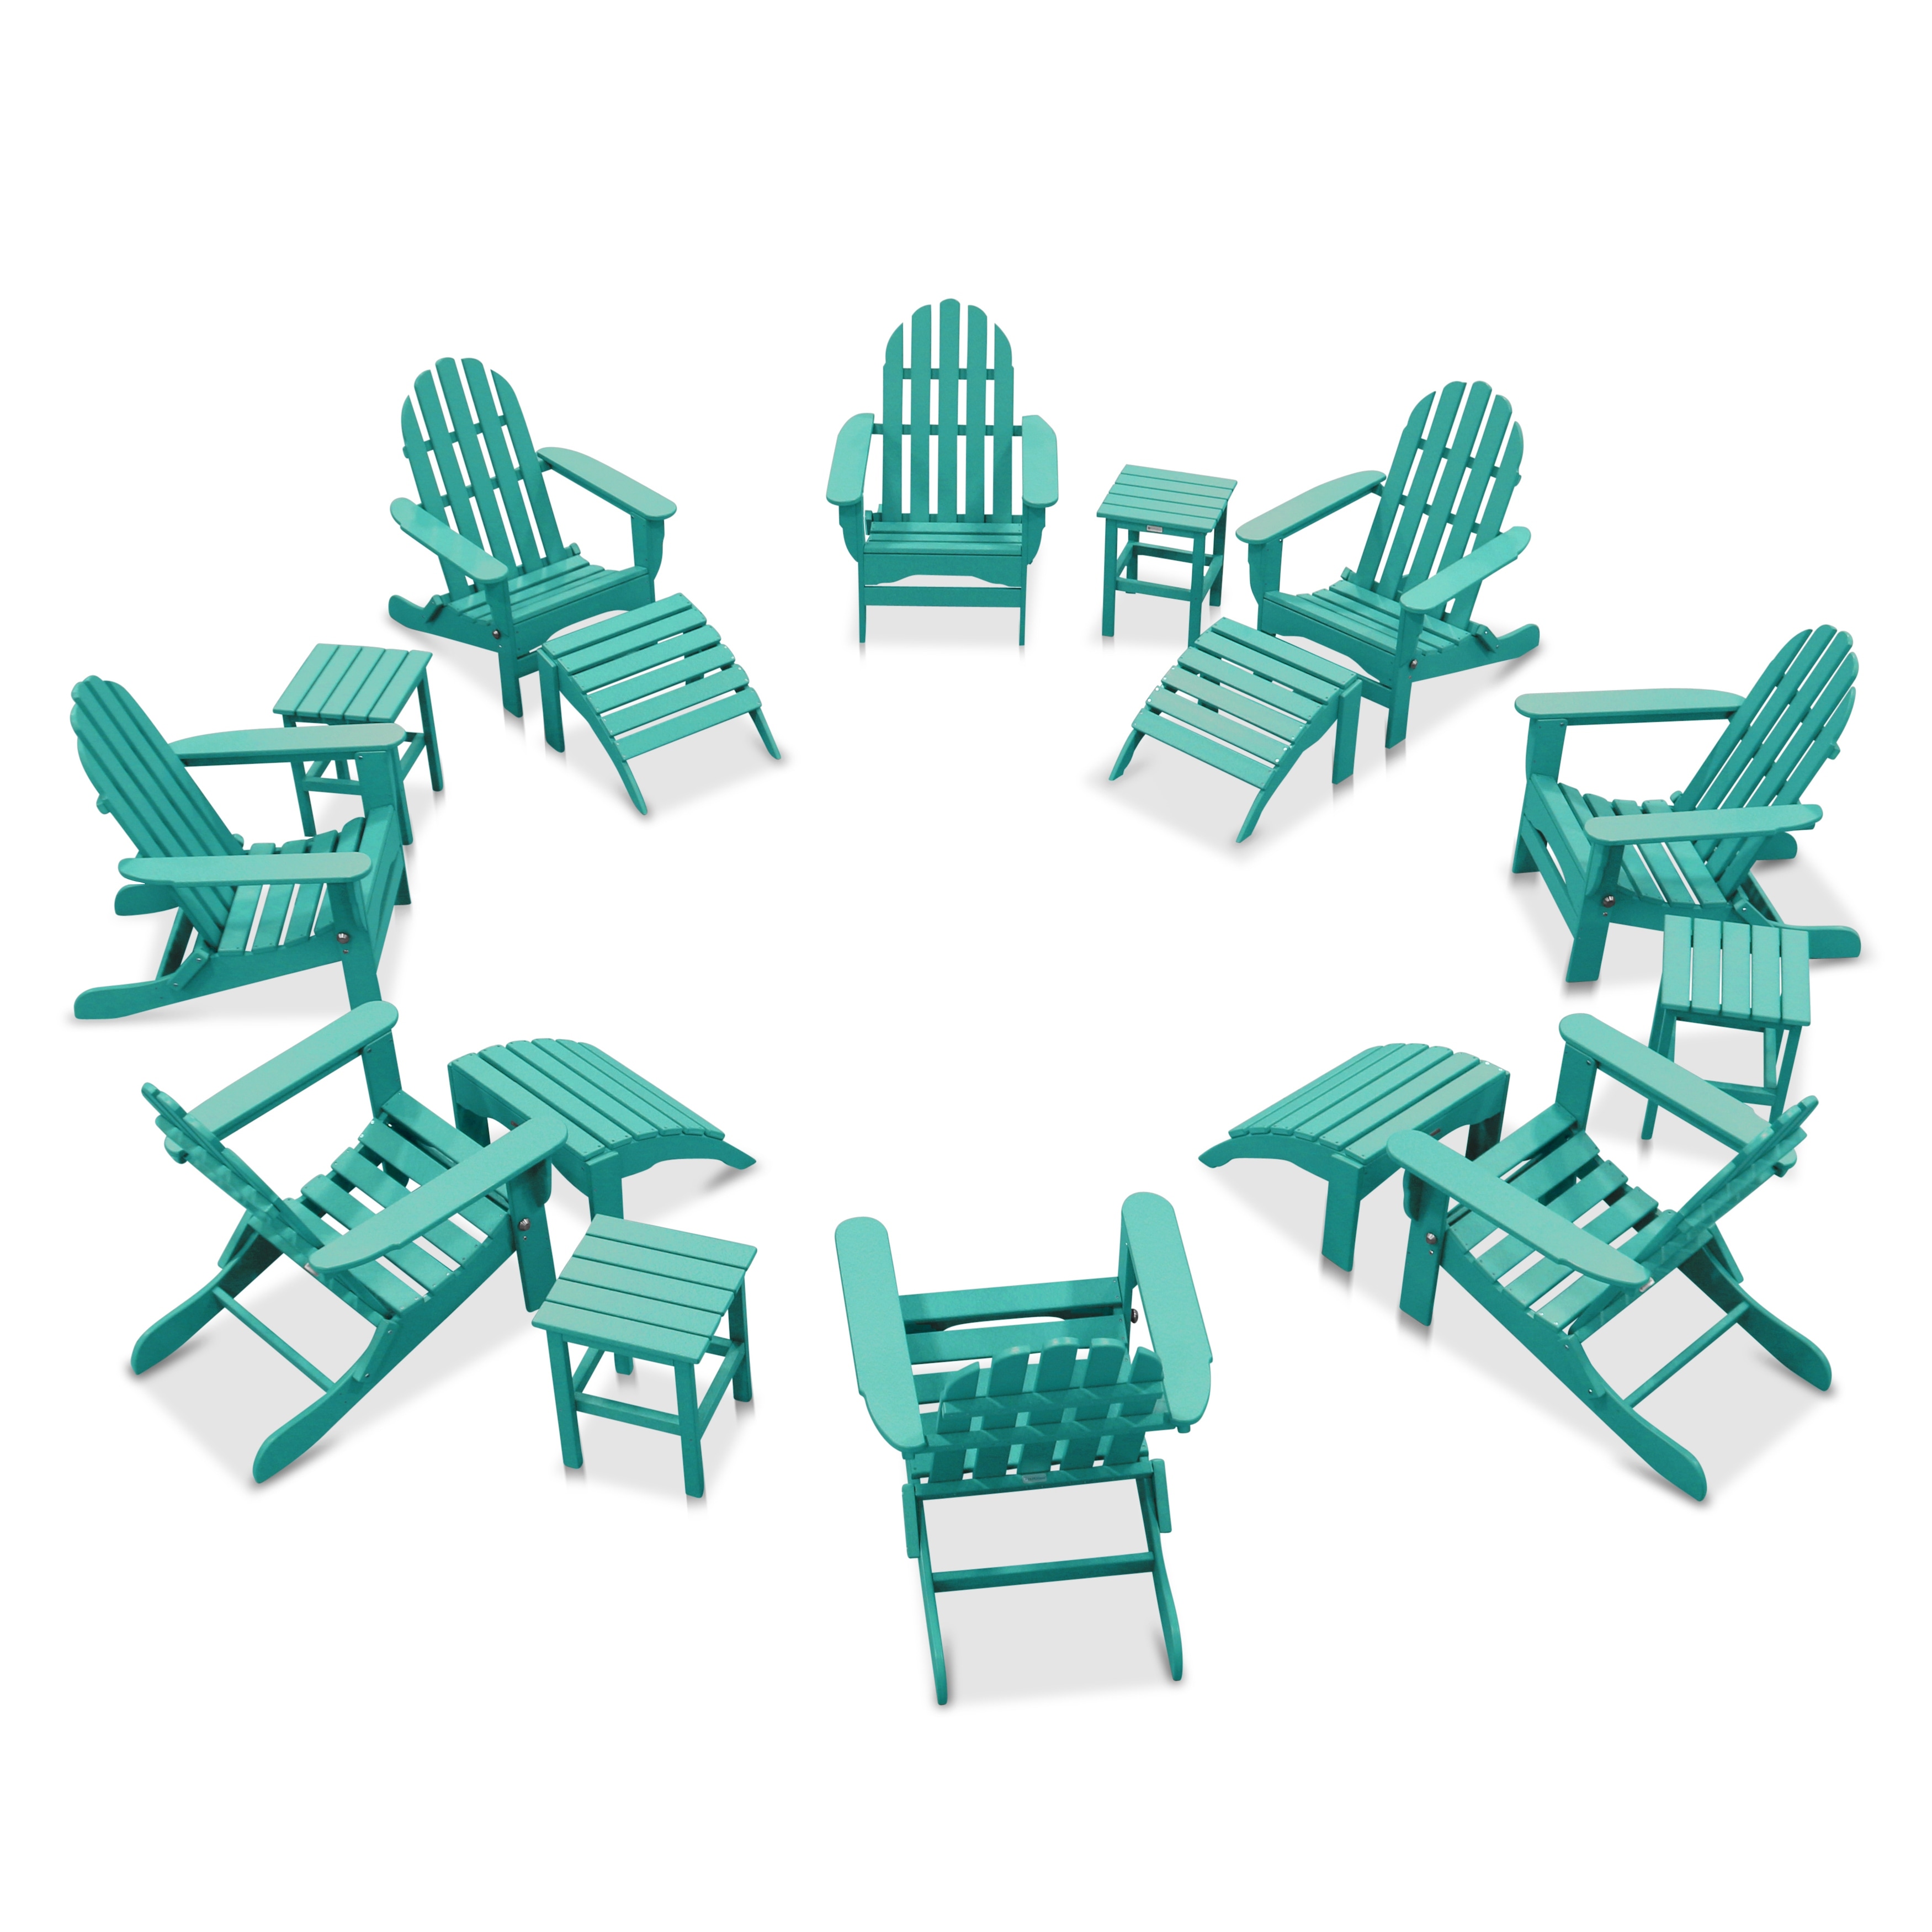 Nelson 8-piece Adirondack Chair Set With 4 Ottomans And 4 Side Tables By Havenside Home